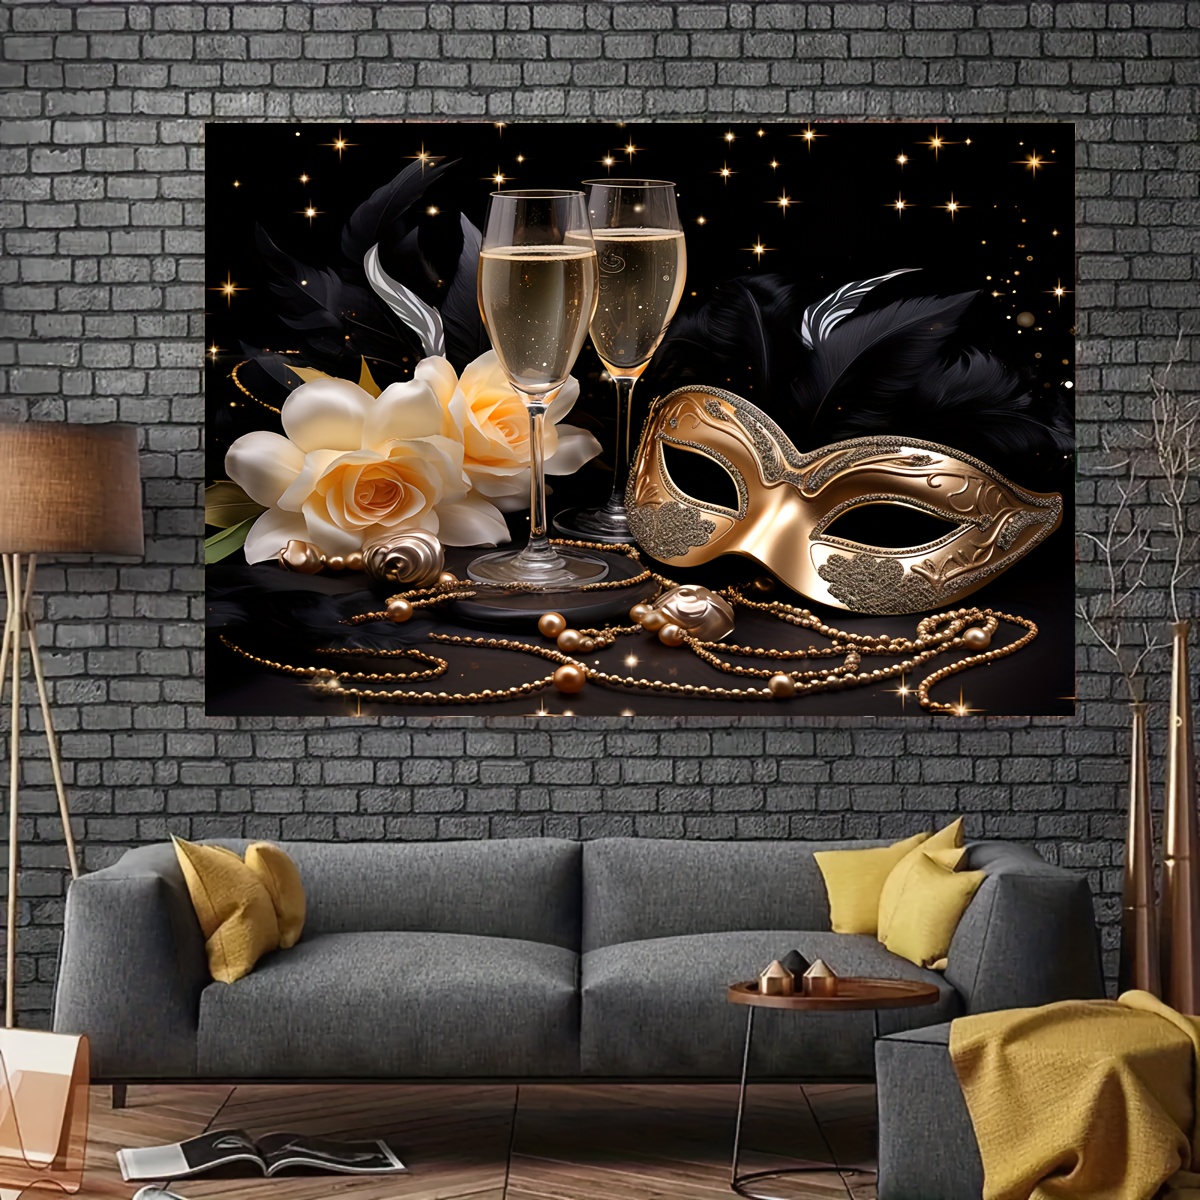  Masquerade Party Backdrops Retro Gold Black Mask Carnival  Birthday Photography Backdrop Fiesta Mardi Gras Dance Photo Background  Champagne Glass Photo Booths Props Decorations 8x6ft Vinyl : Electronics